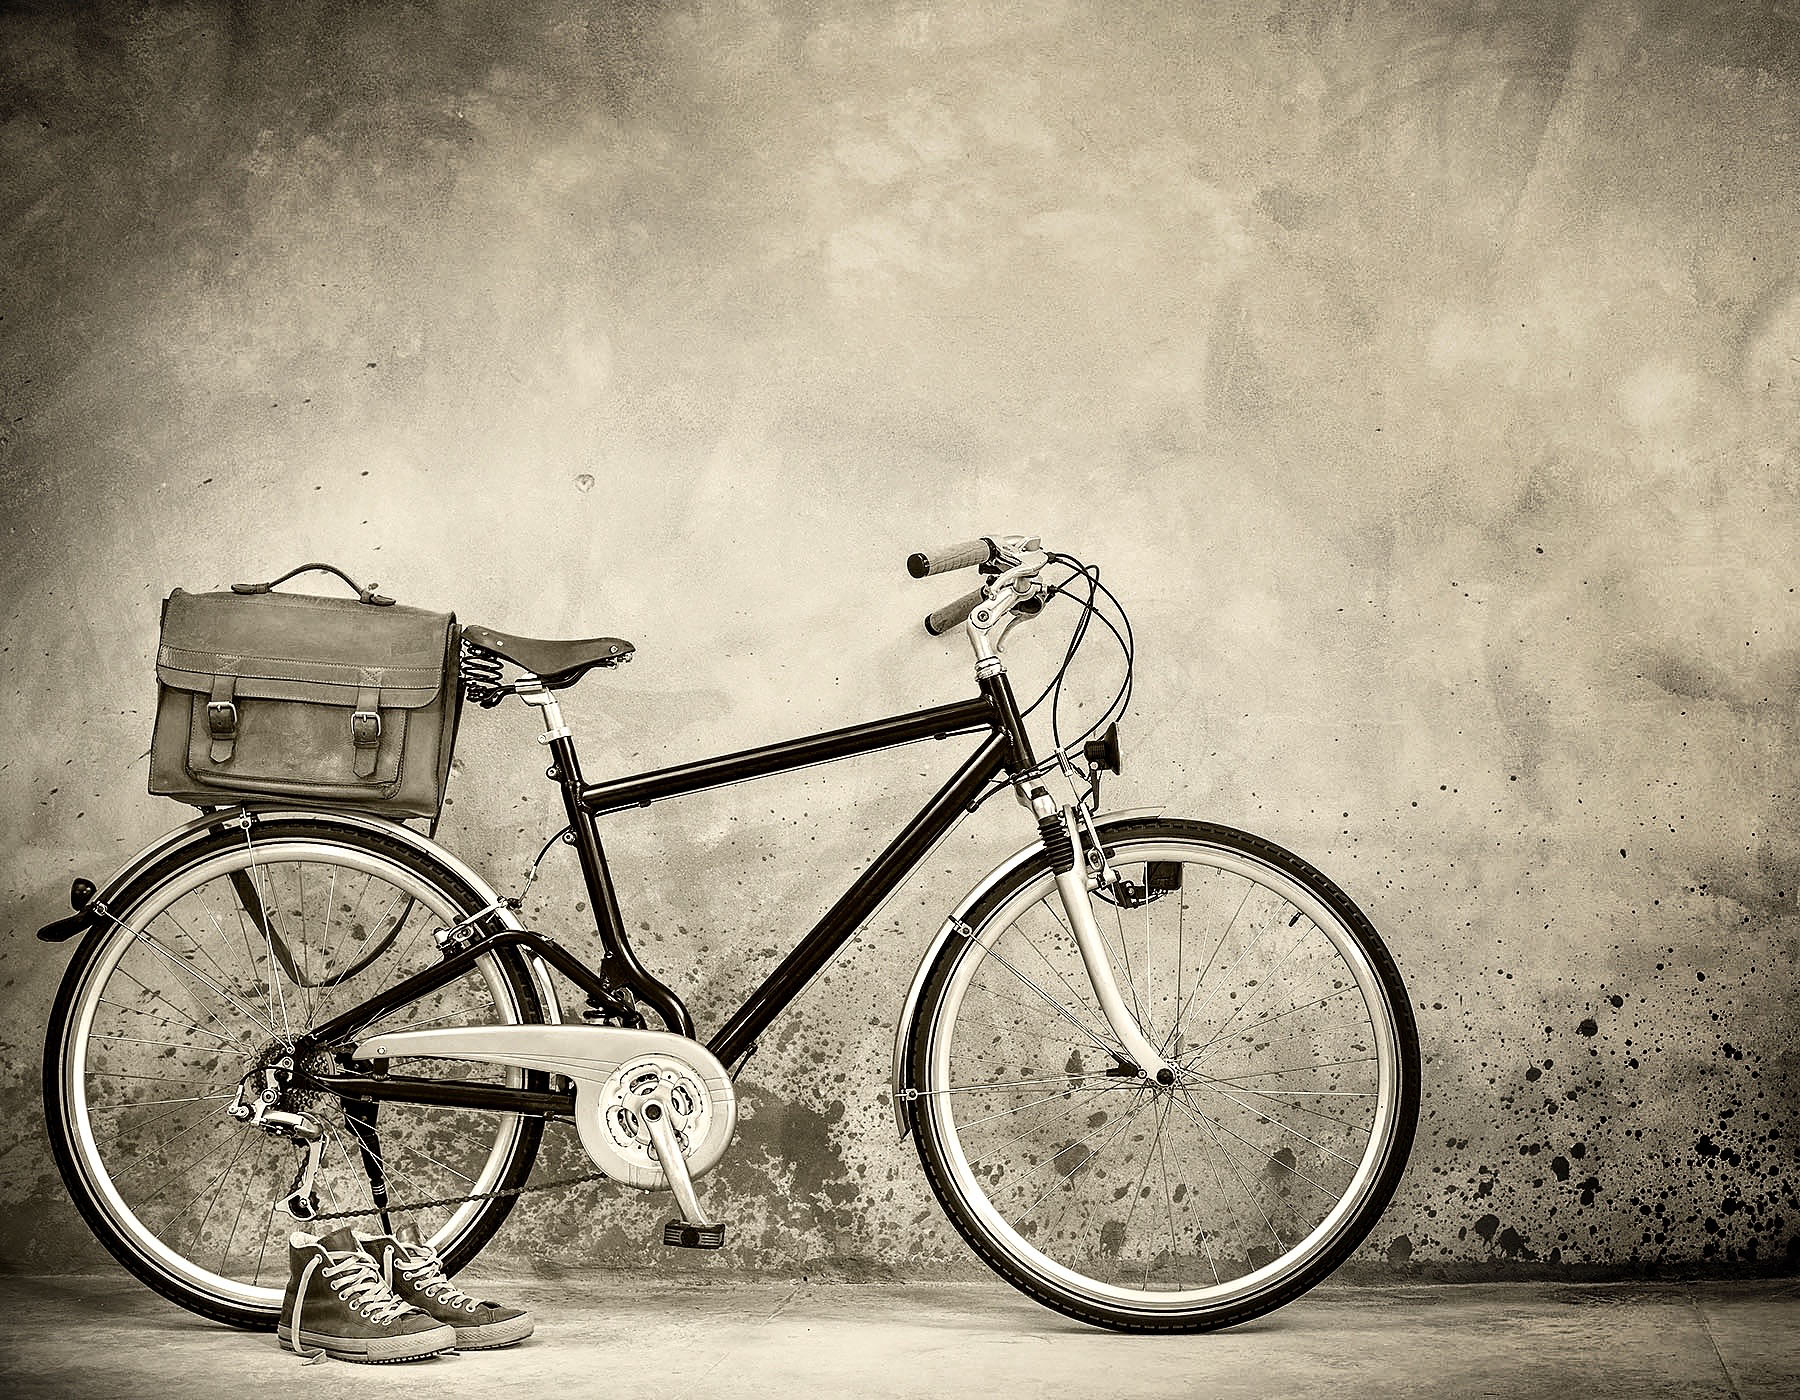 Retro bike with aged leather postman's bag and old sneakers fron